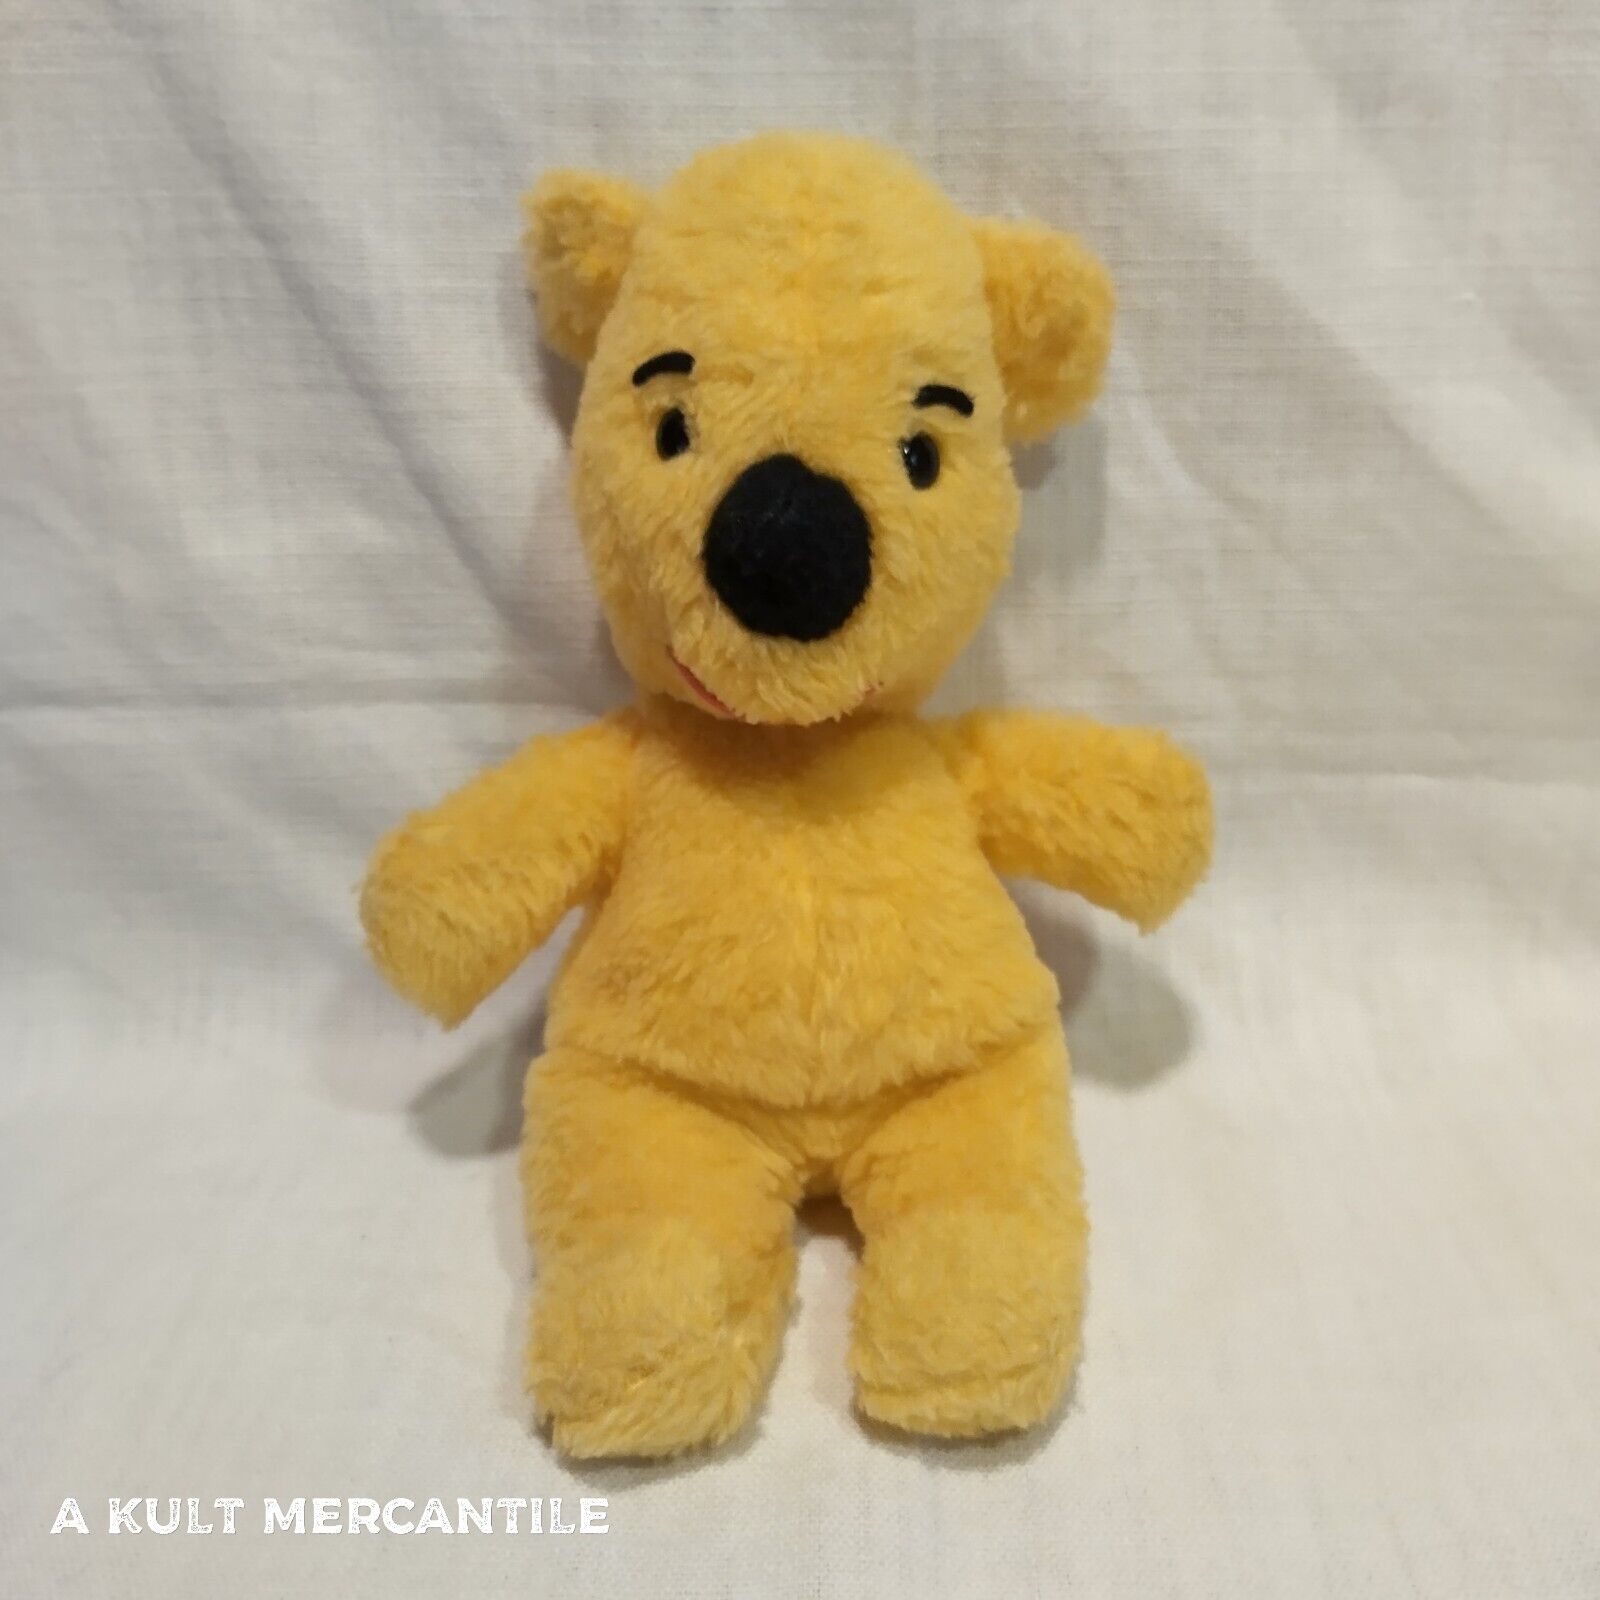 Vintage Made For Sears Winnie The Pooh Plush By GUND